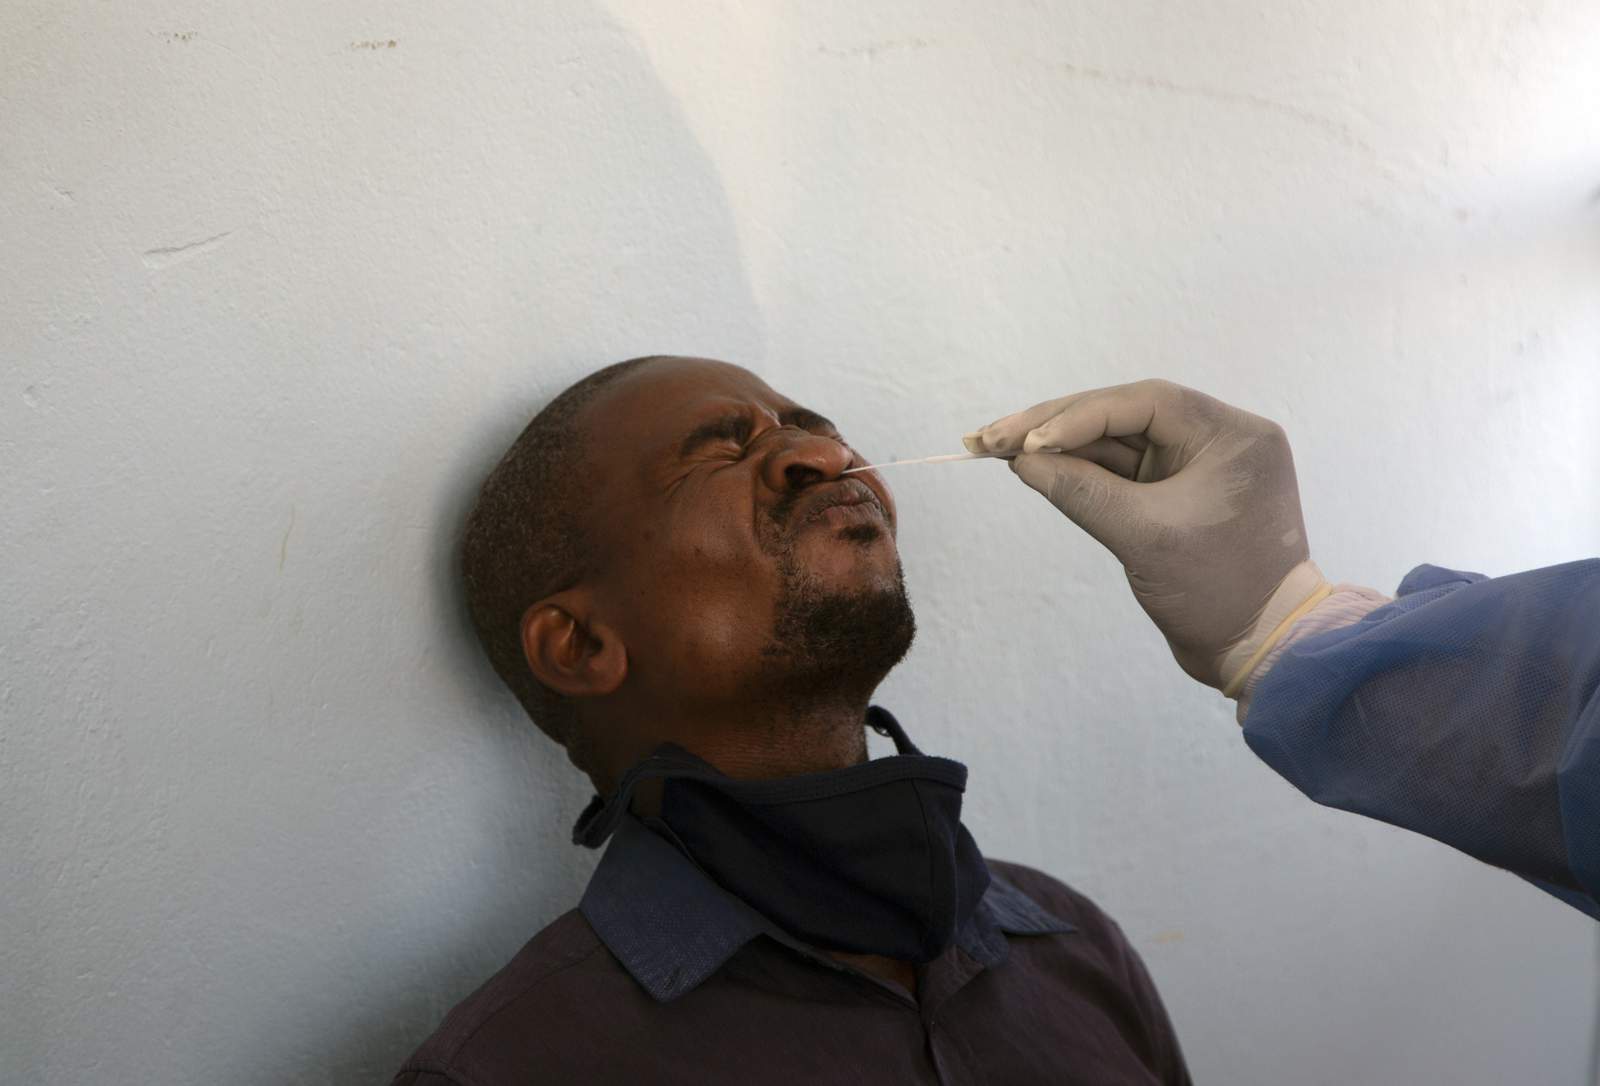 Increased testing needed as Africa sees rise in virus cases